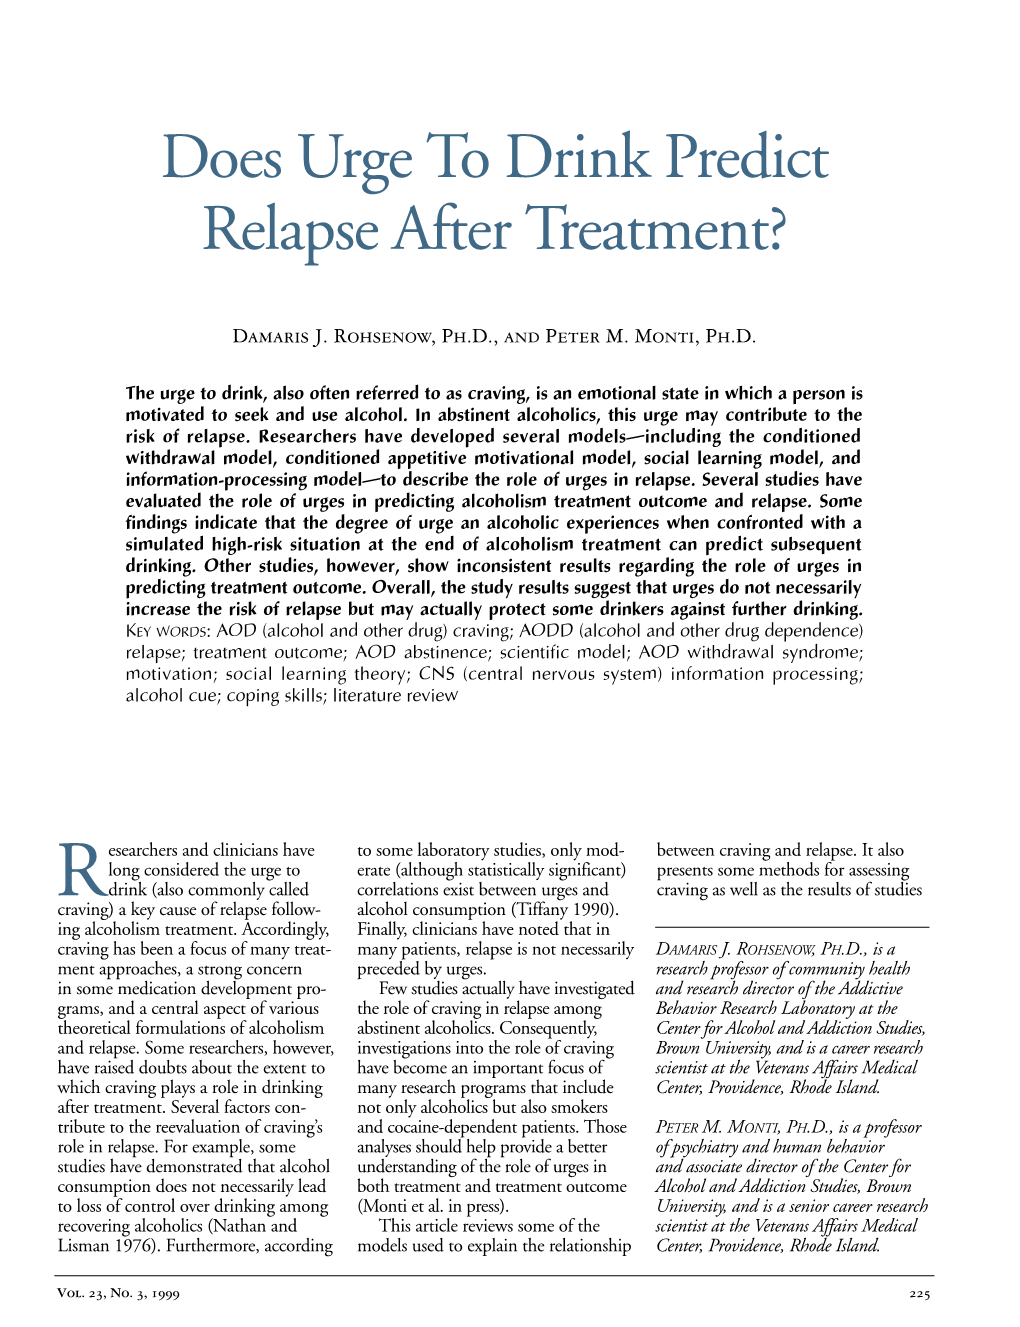 Does Urge to Drink Predict Relapse After Treatment?